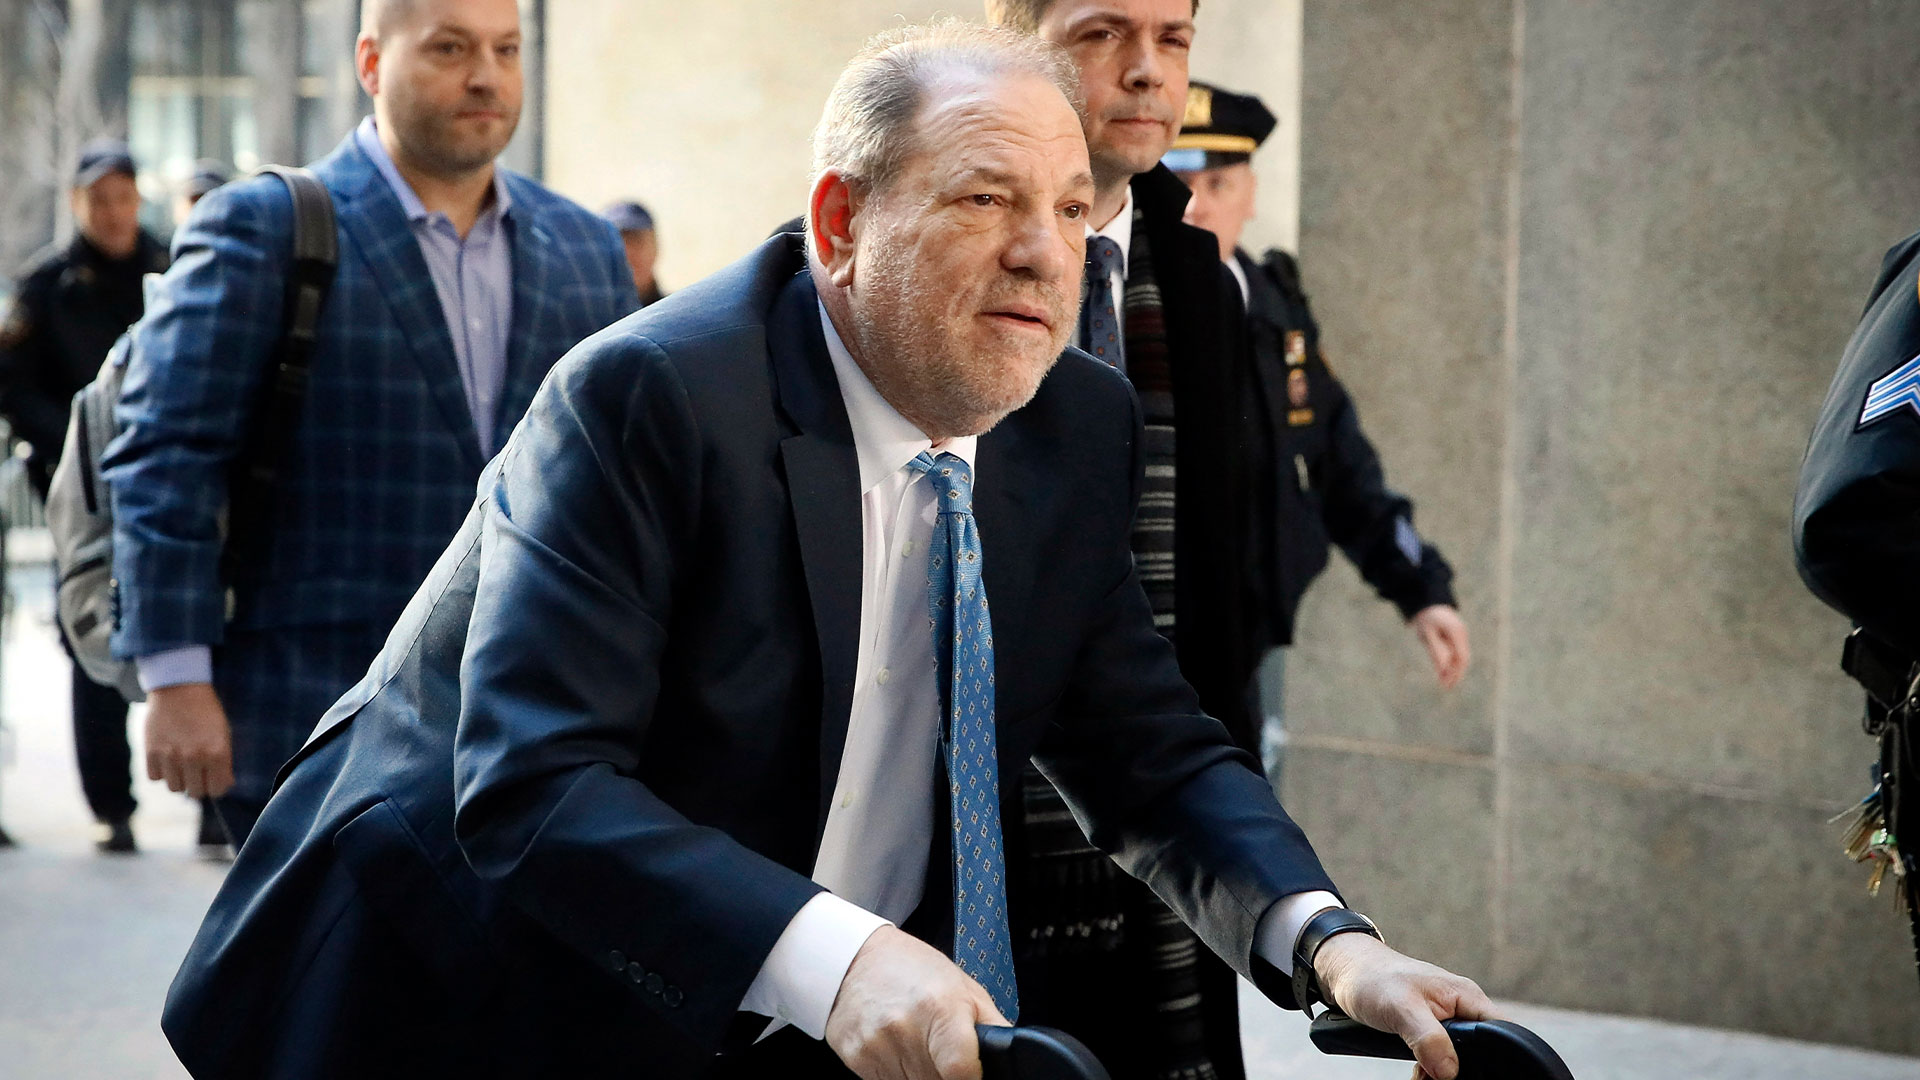 Harvey Weinstein hospitalized days after his rape conviction was overturned as lawyer reveals health is a ‘train wreck’ [Video]